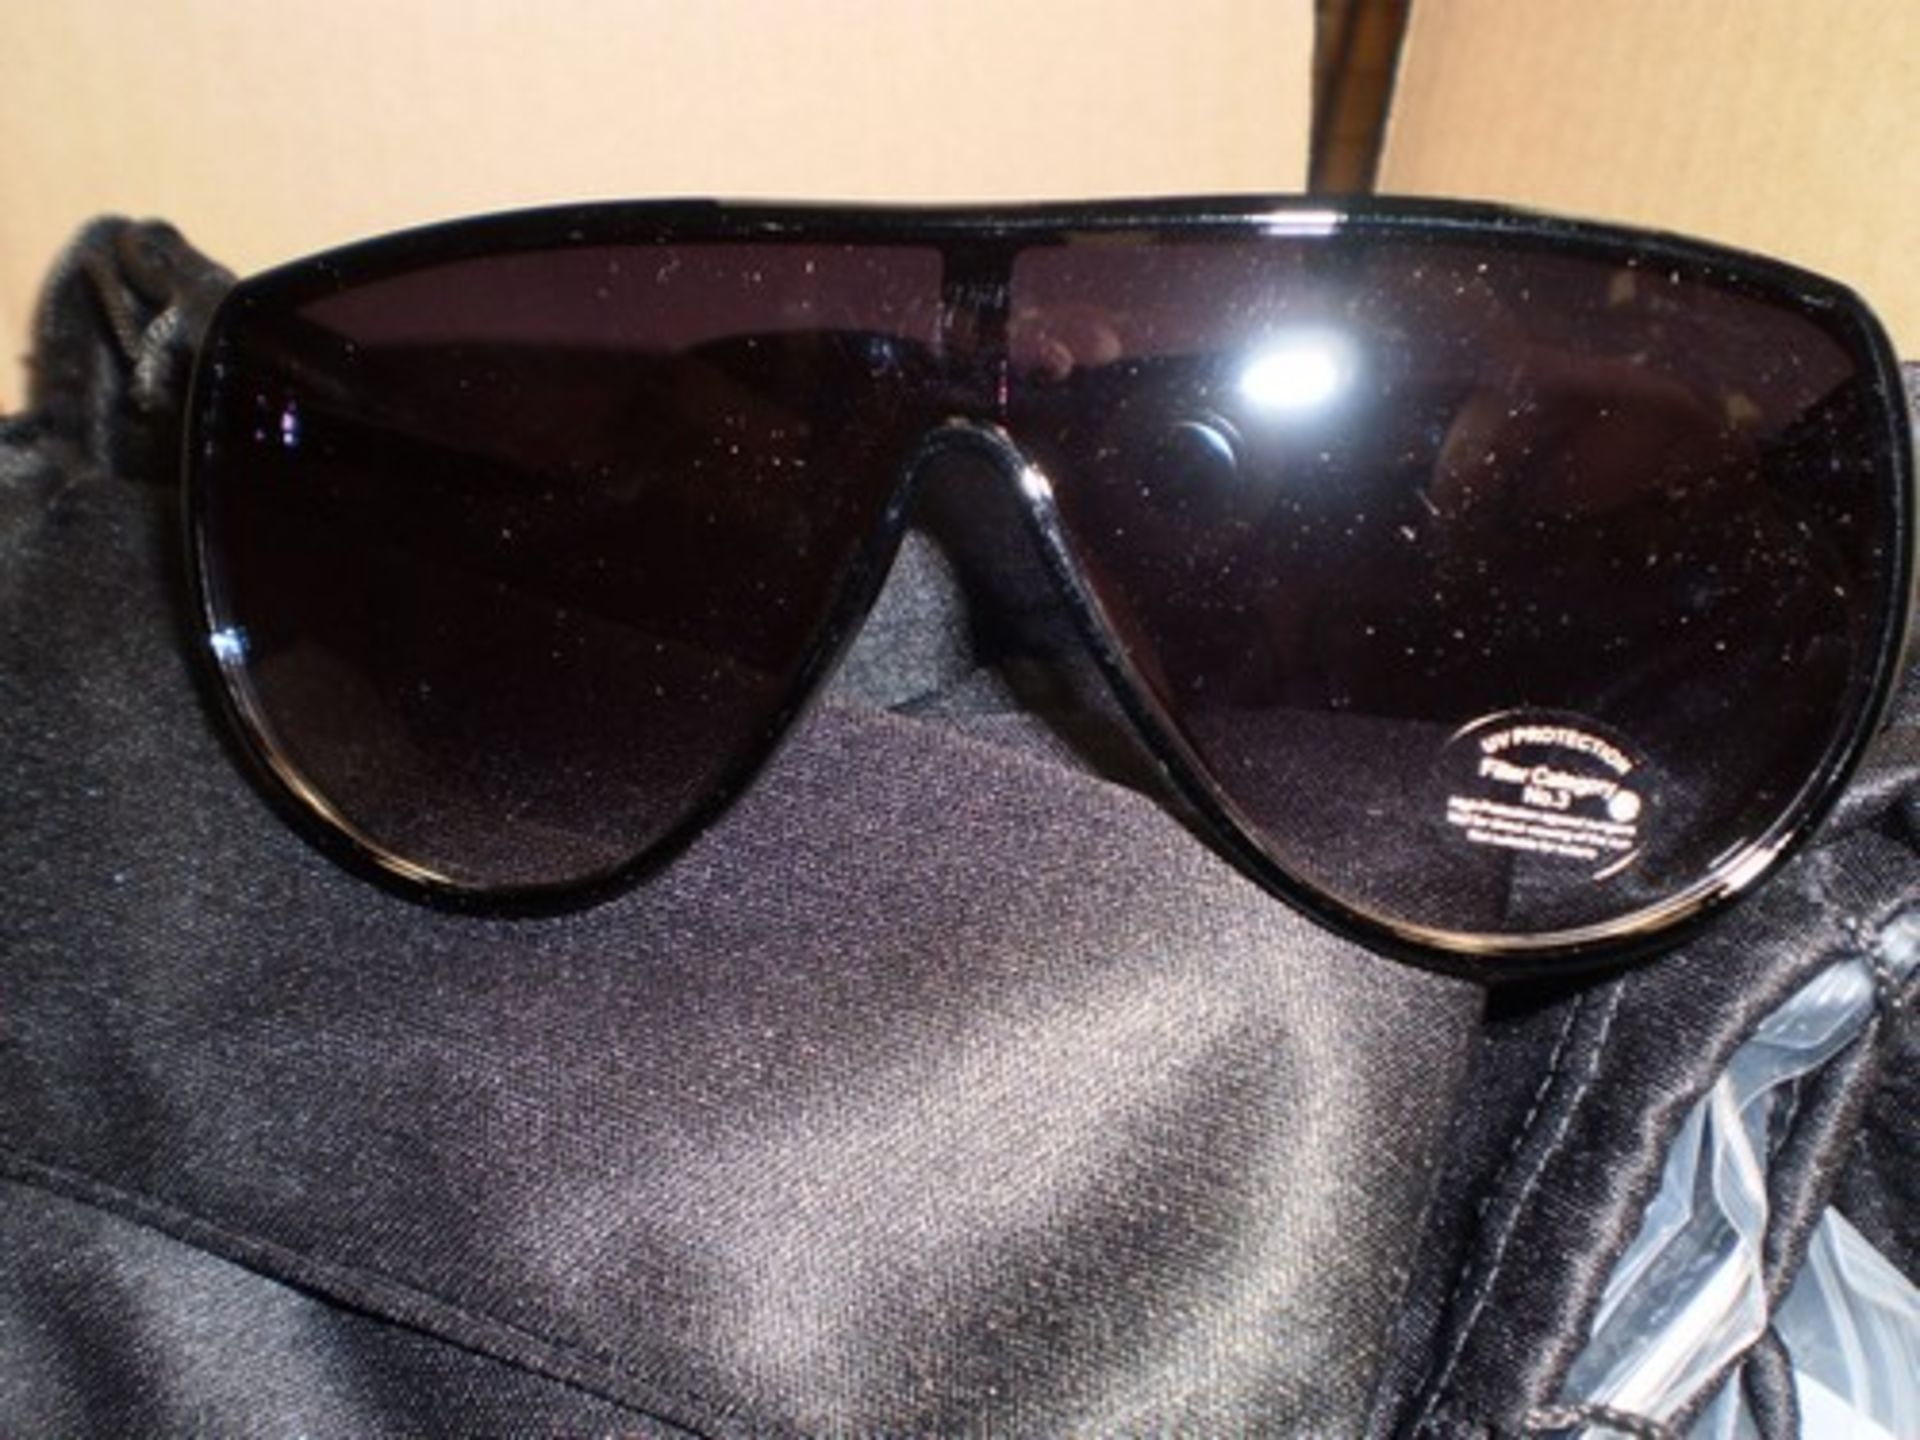 45 x pairs of unbranded sunglasses with UV protection, all with cloth glass bag - new (C9C)